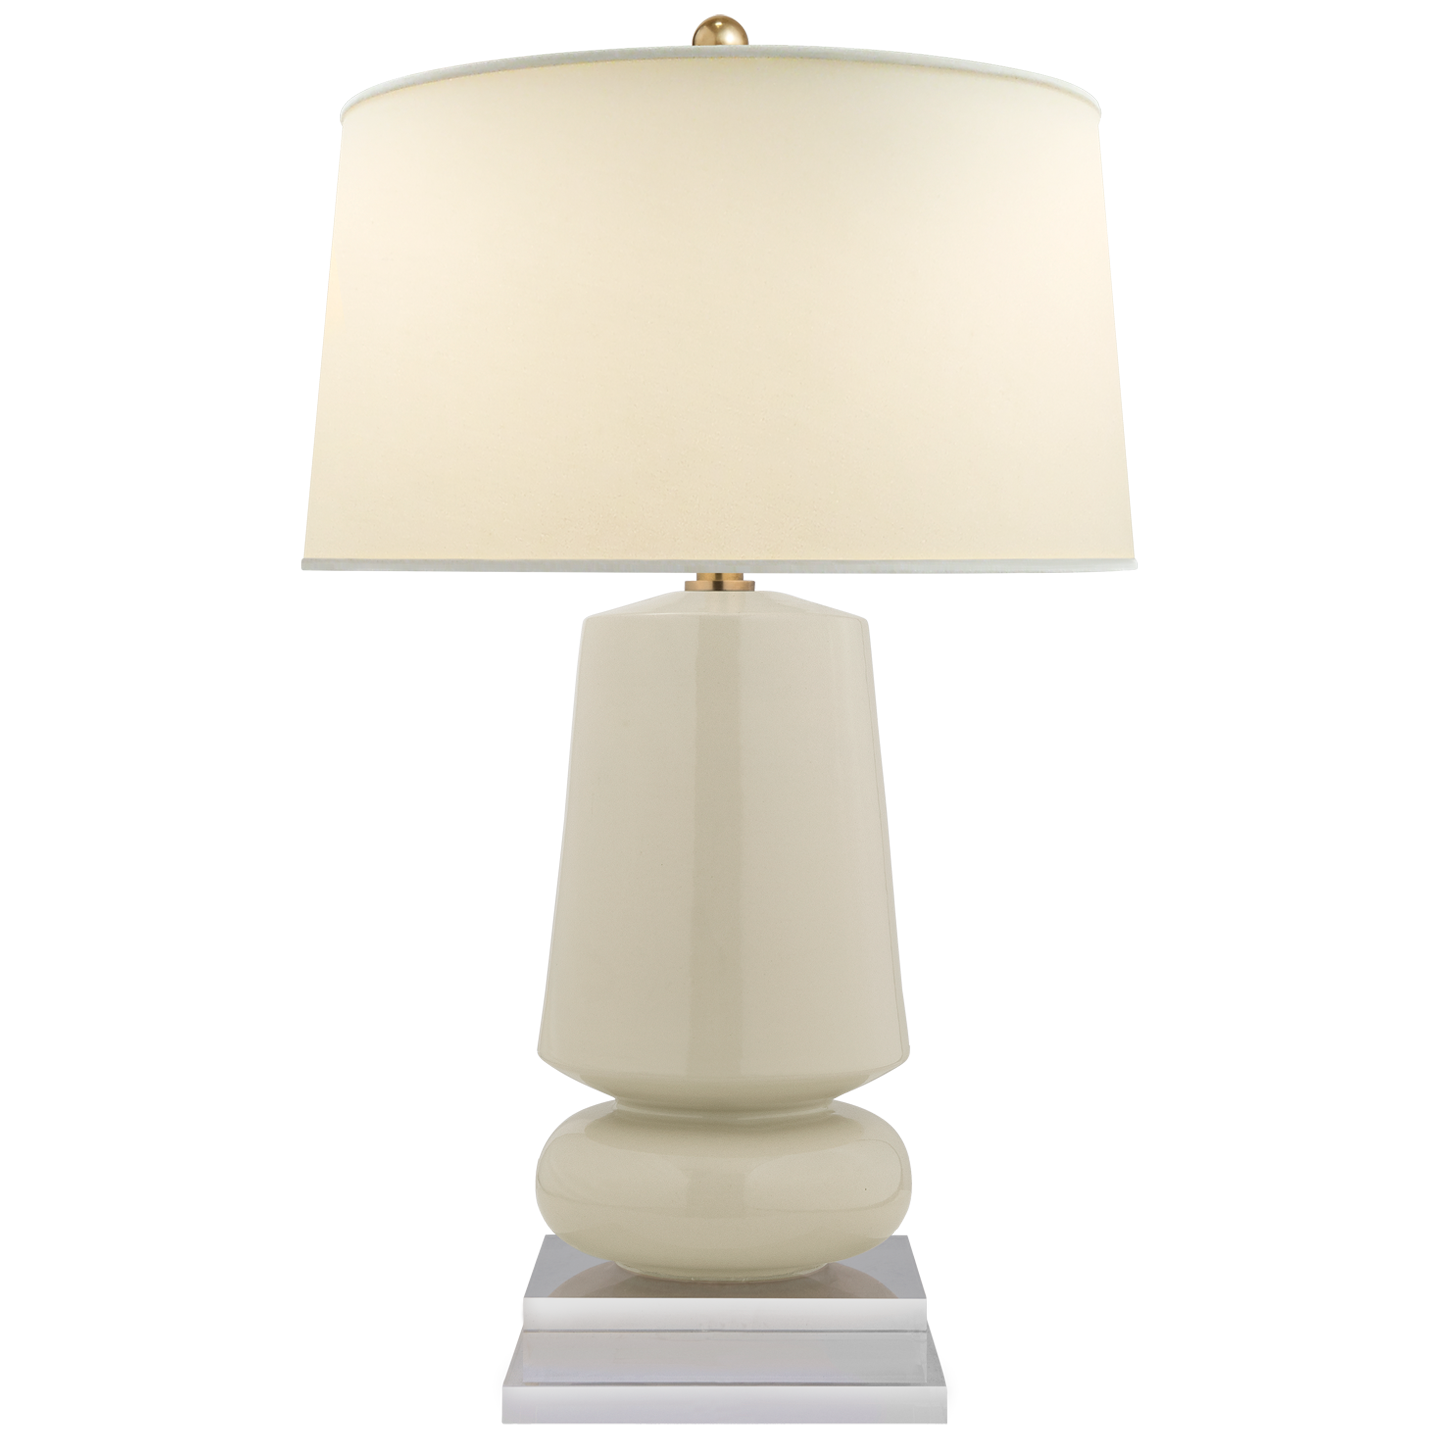 Parisienne Small Table Lamp